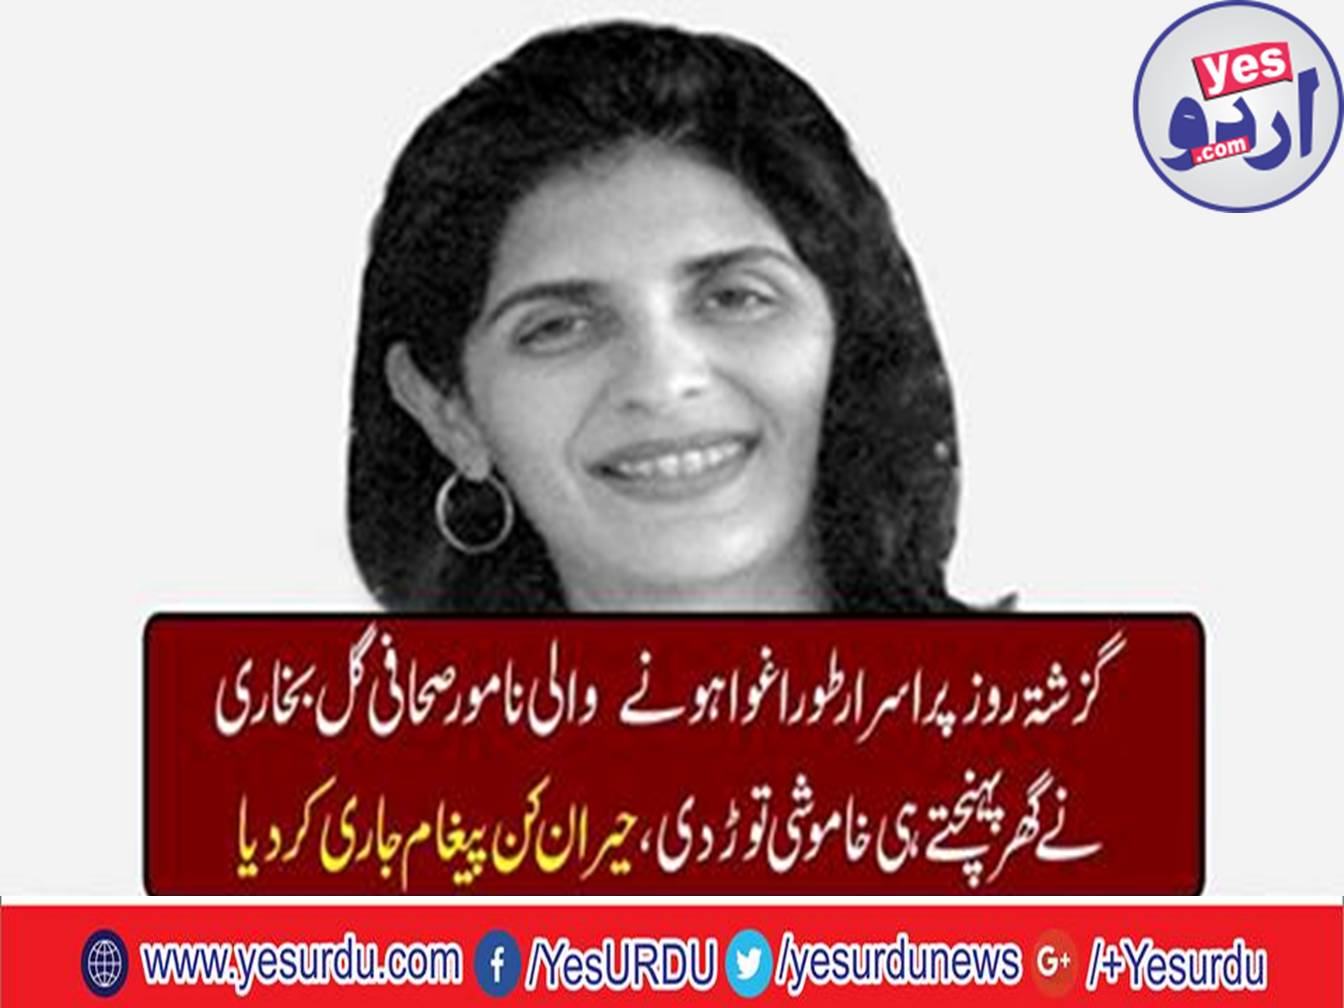 The famous journalist Gul Bukhari released a surprise message